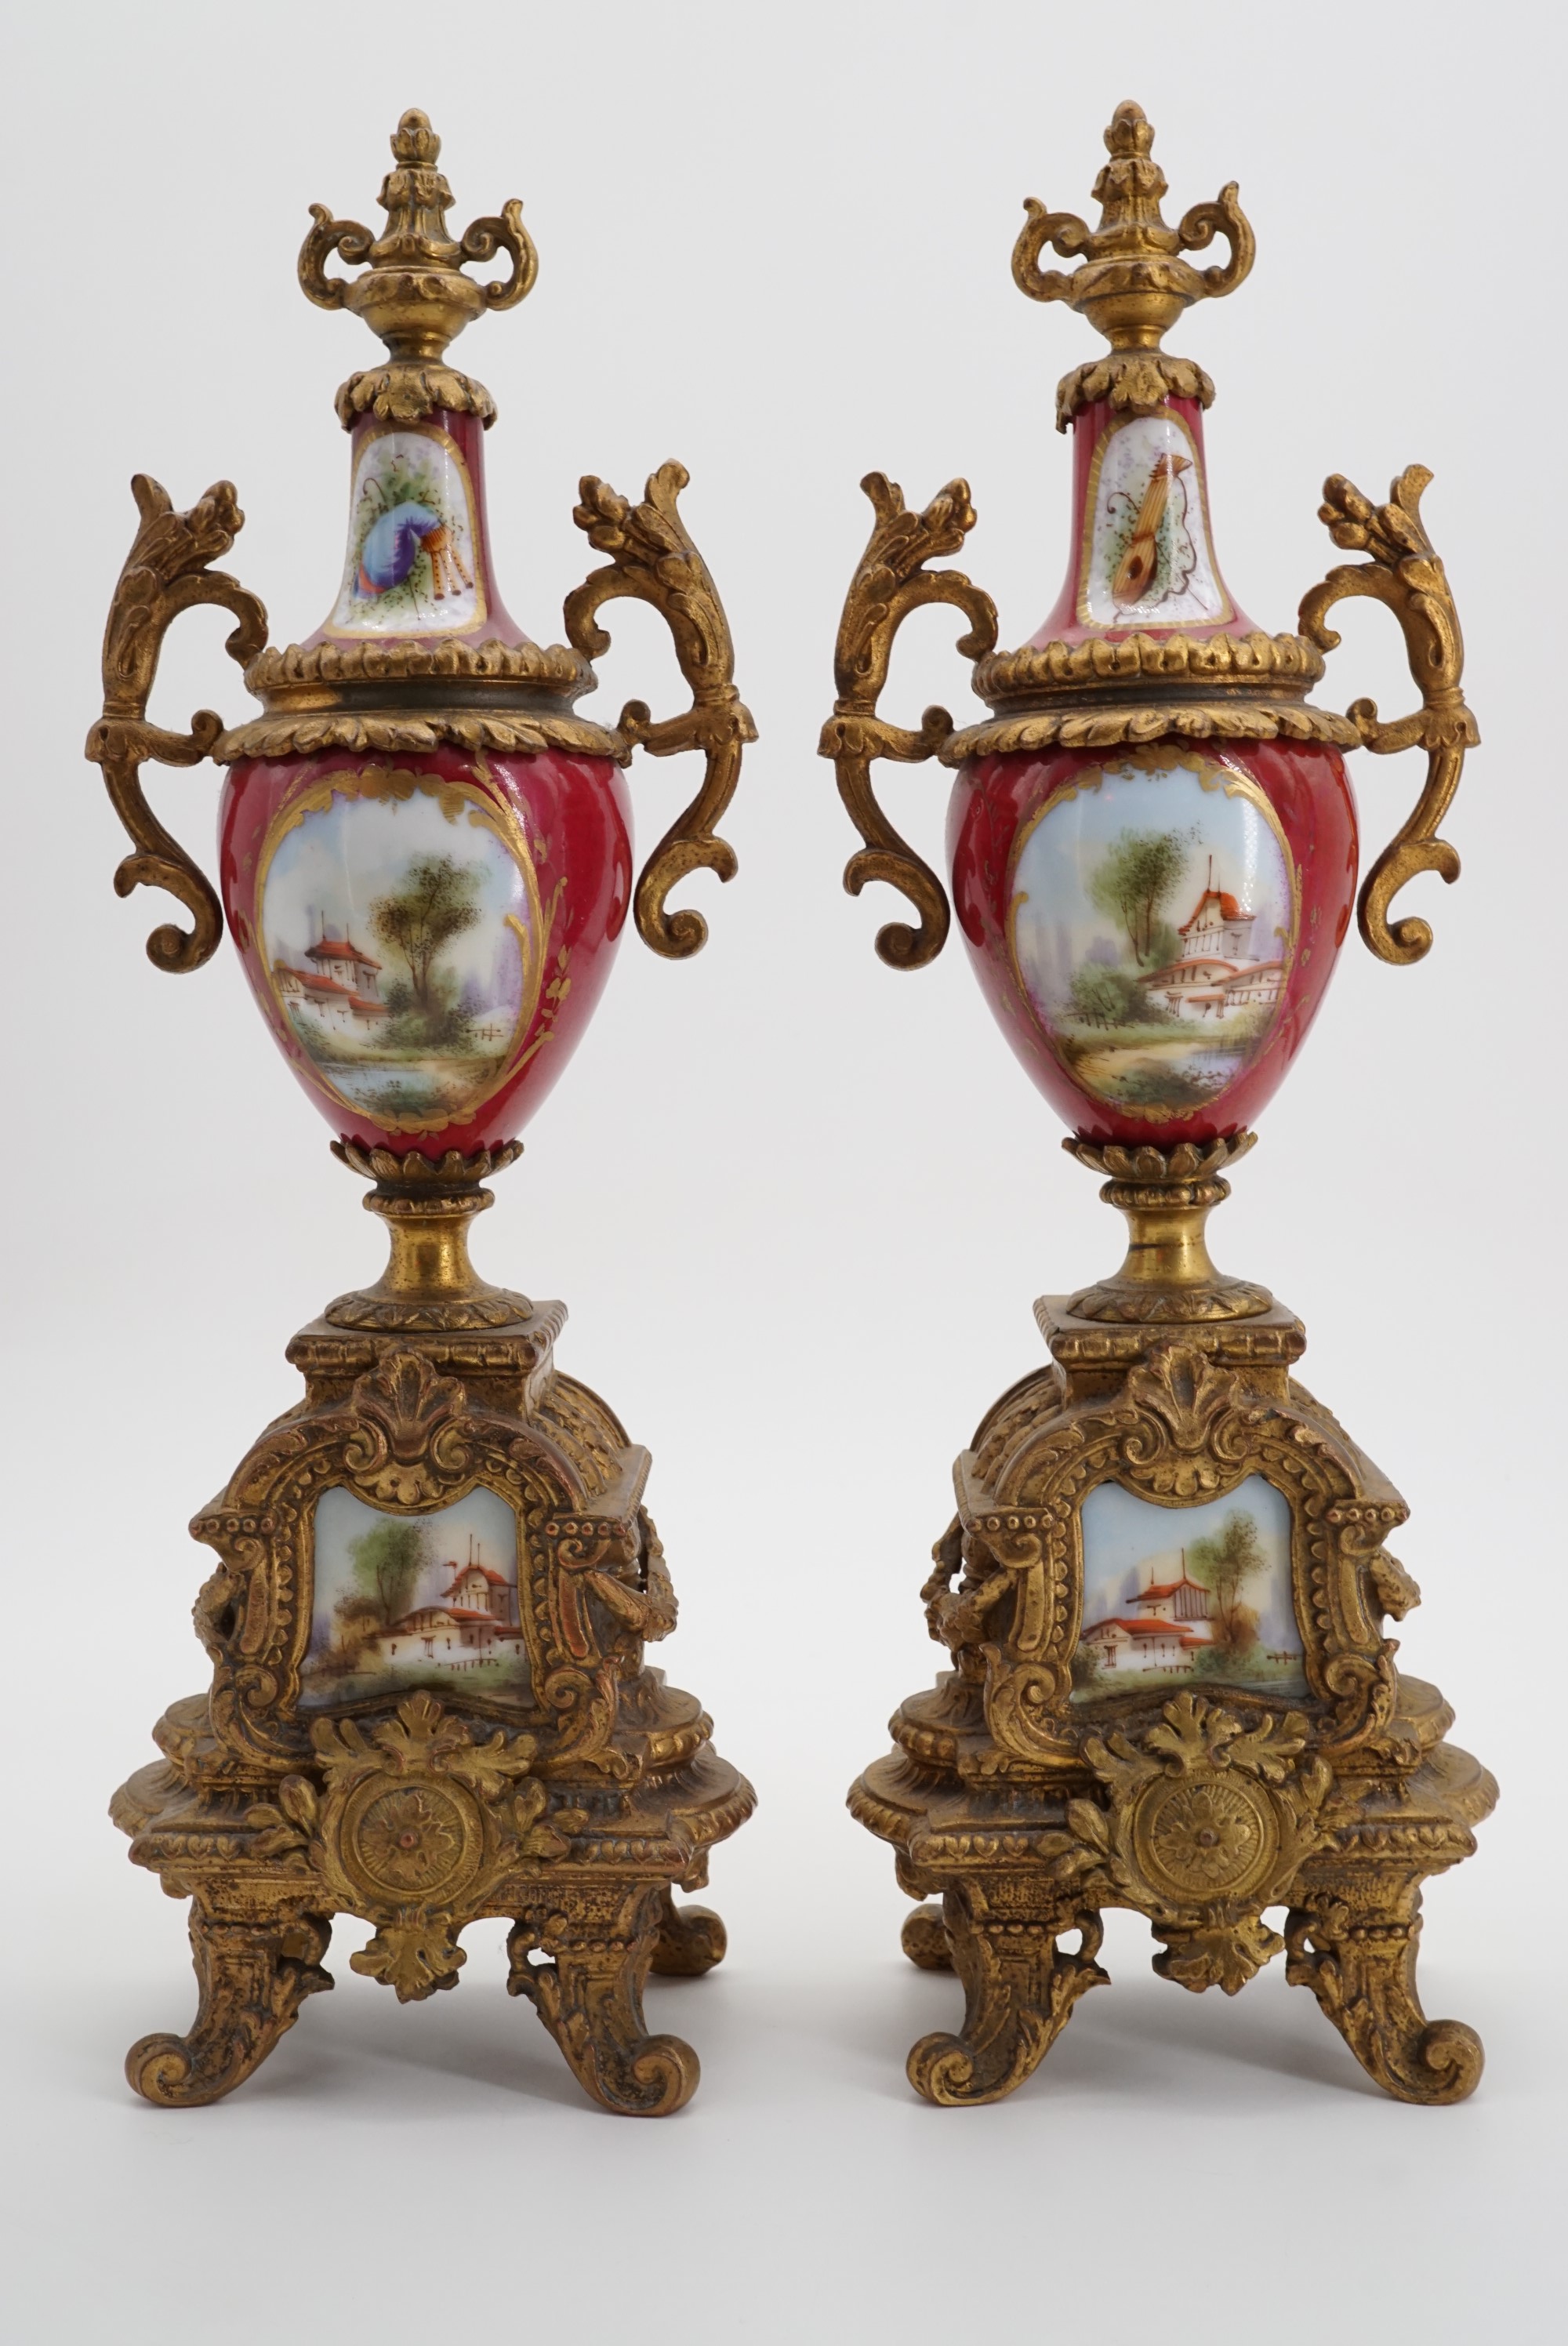 A pair of late 19th Century ormolu-mounted garniture urns, each oviform with flamboyant neo-